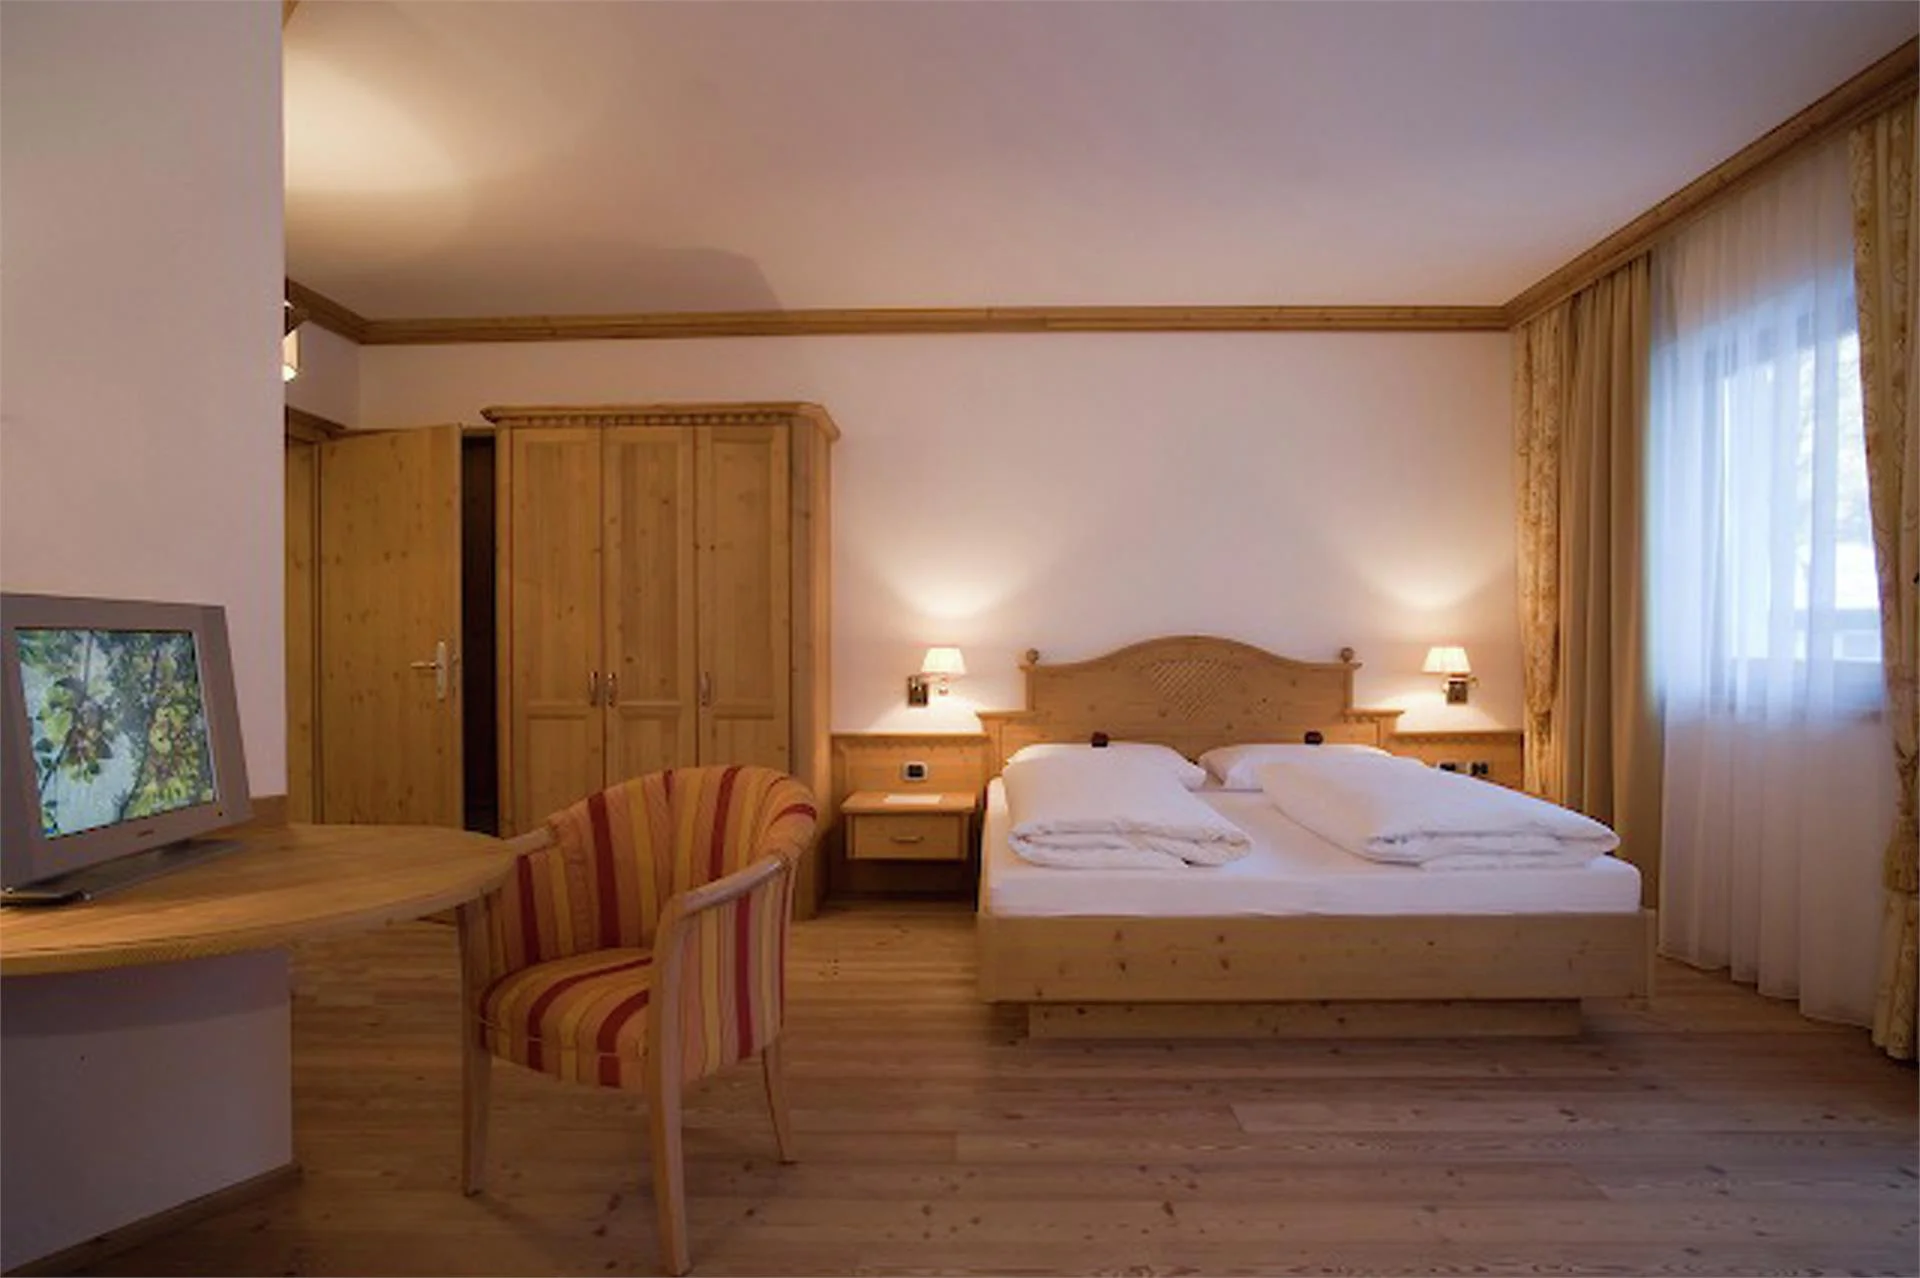 Residence Hotel Alpinum Sand in Taufers/Campo Tures 19 suedtirol.info